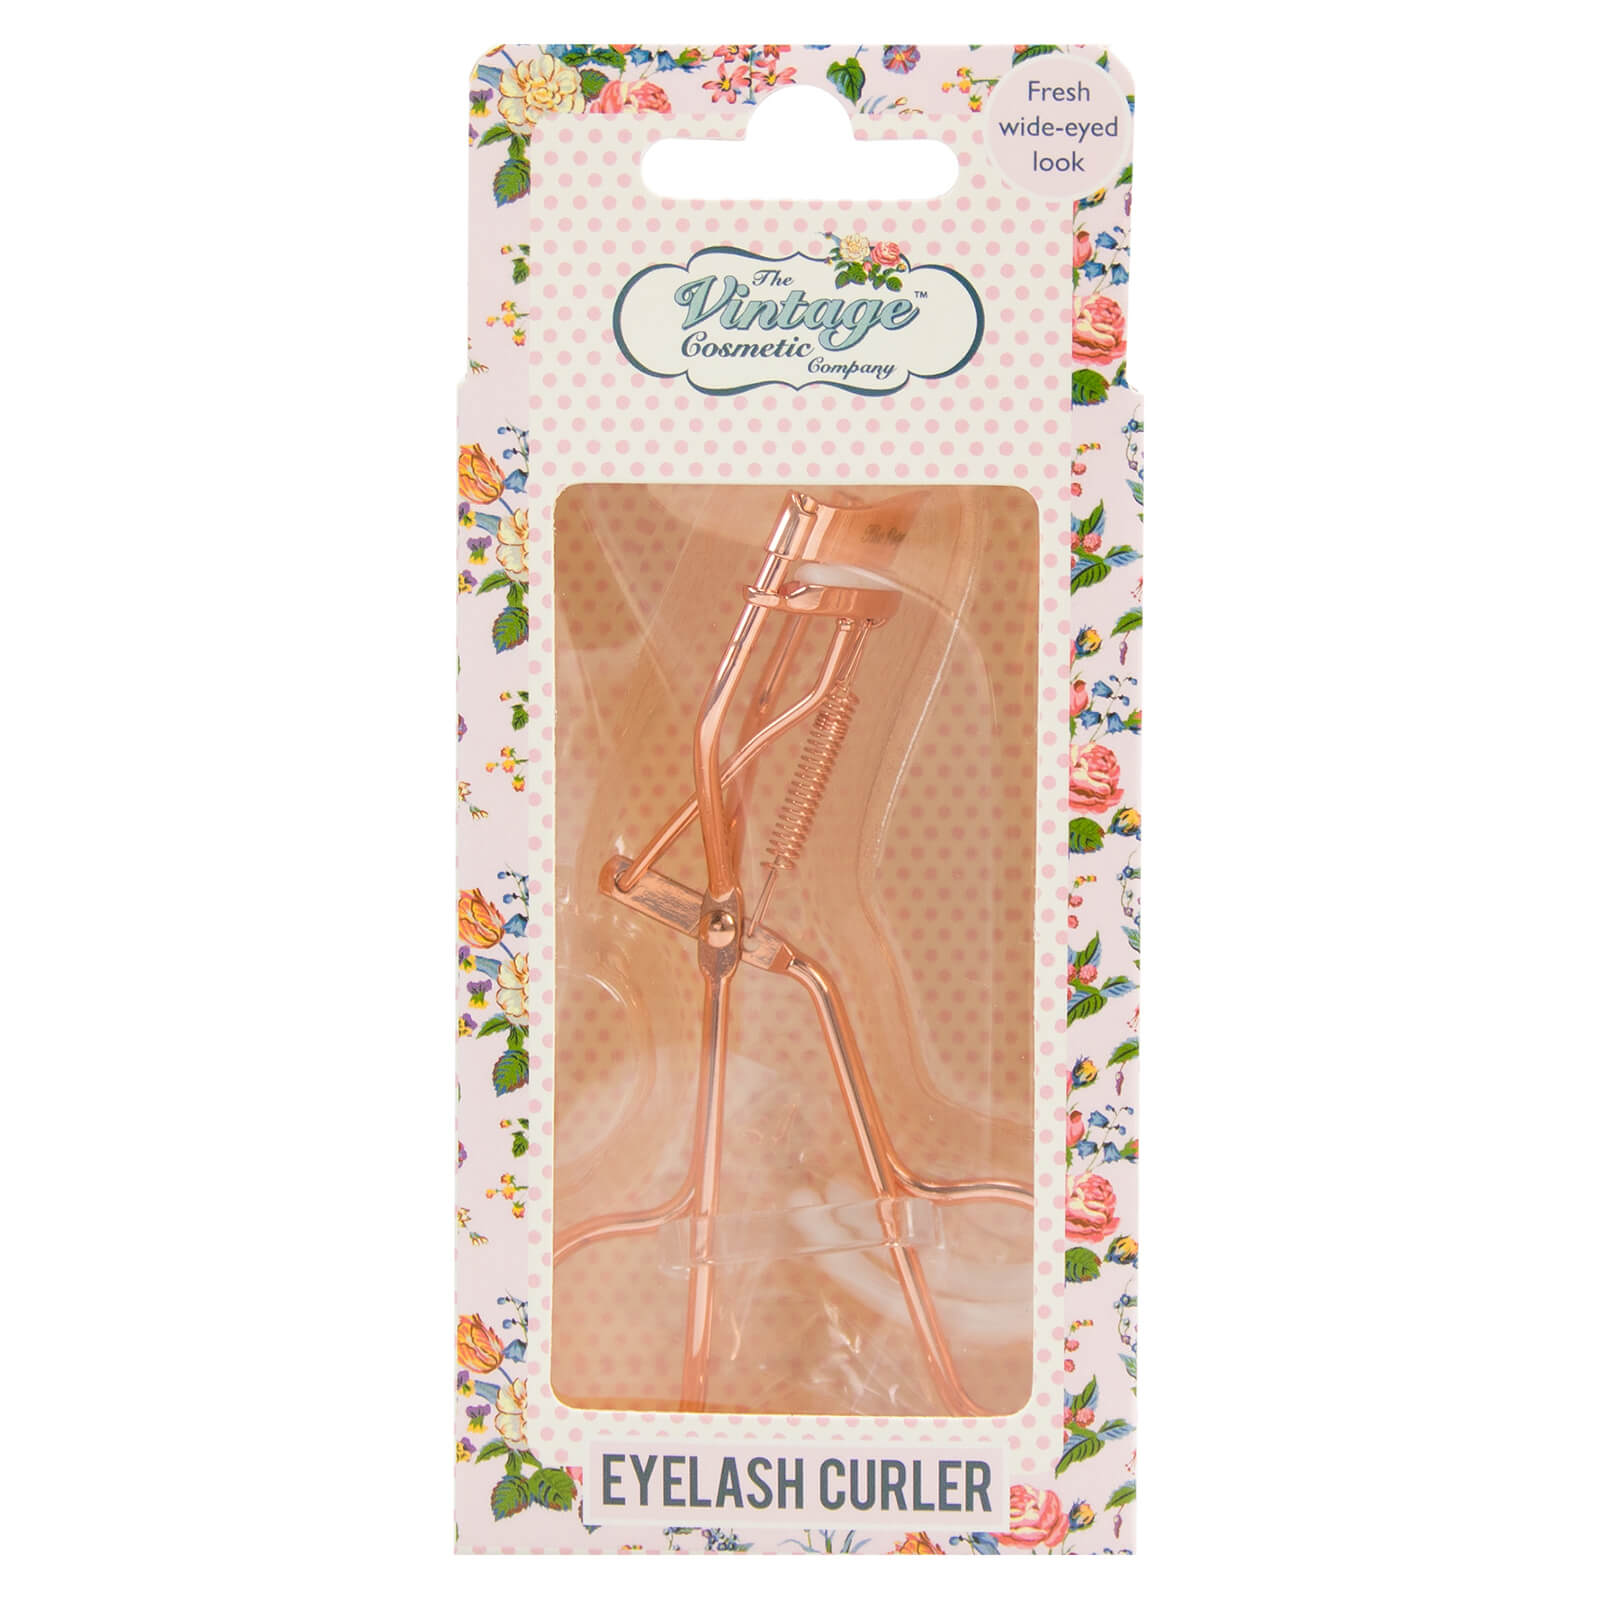 The Vintage Cosmetic Company - The vintage cosmetics company eyelash curlers - rose gold